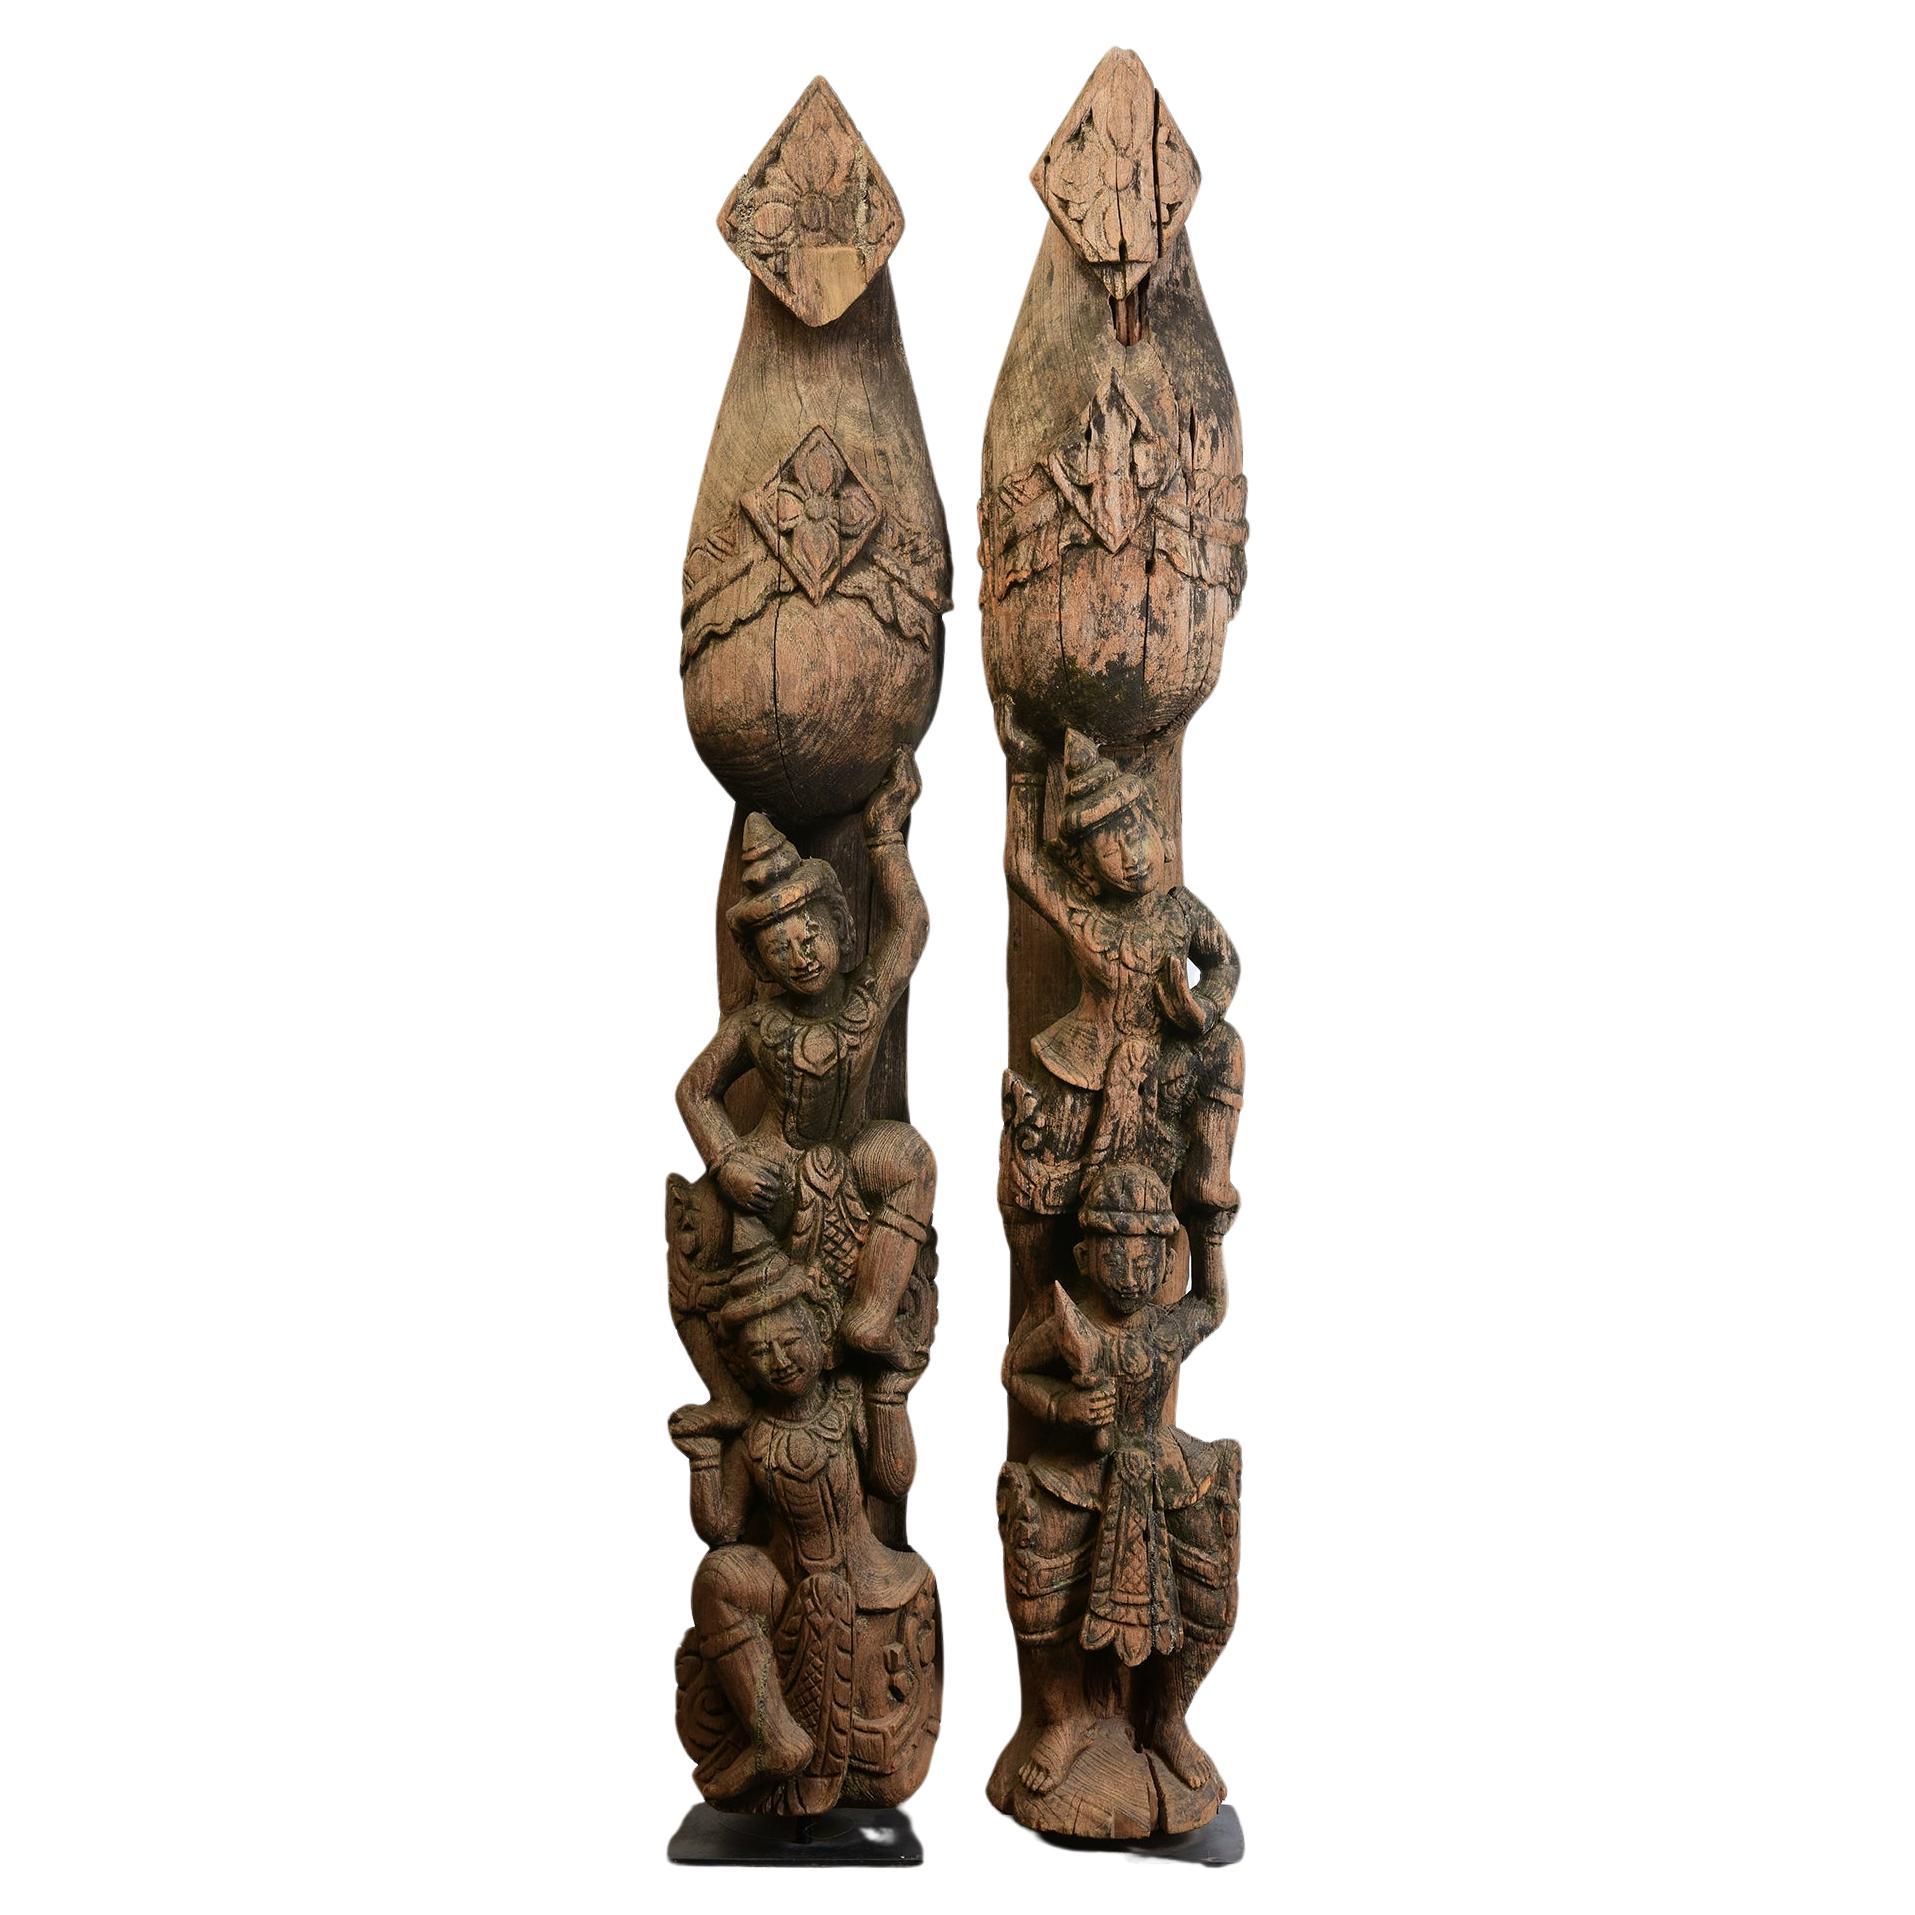 Early 20th Century, A Pair of Antique Burmese Wooden Finial Chofa with Figures